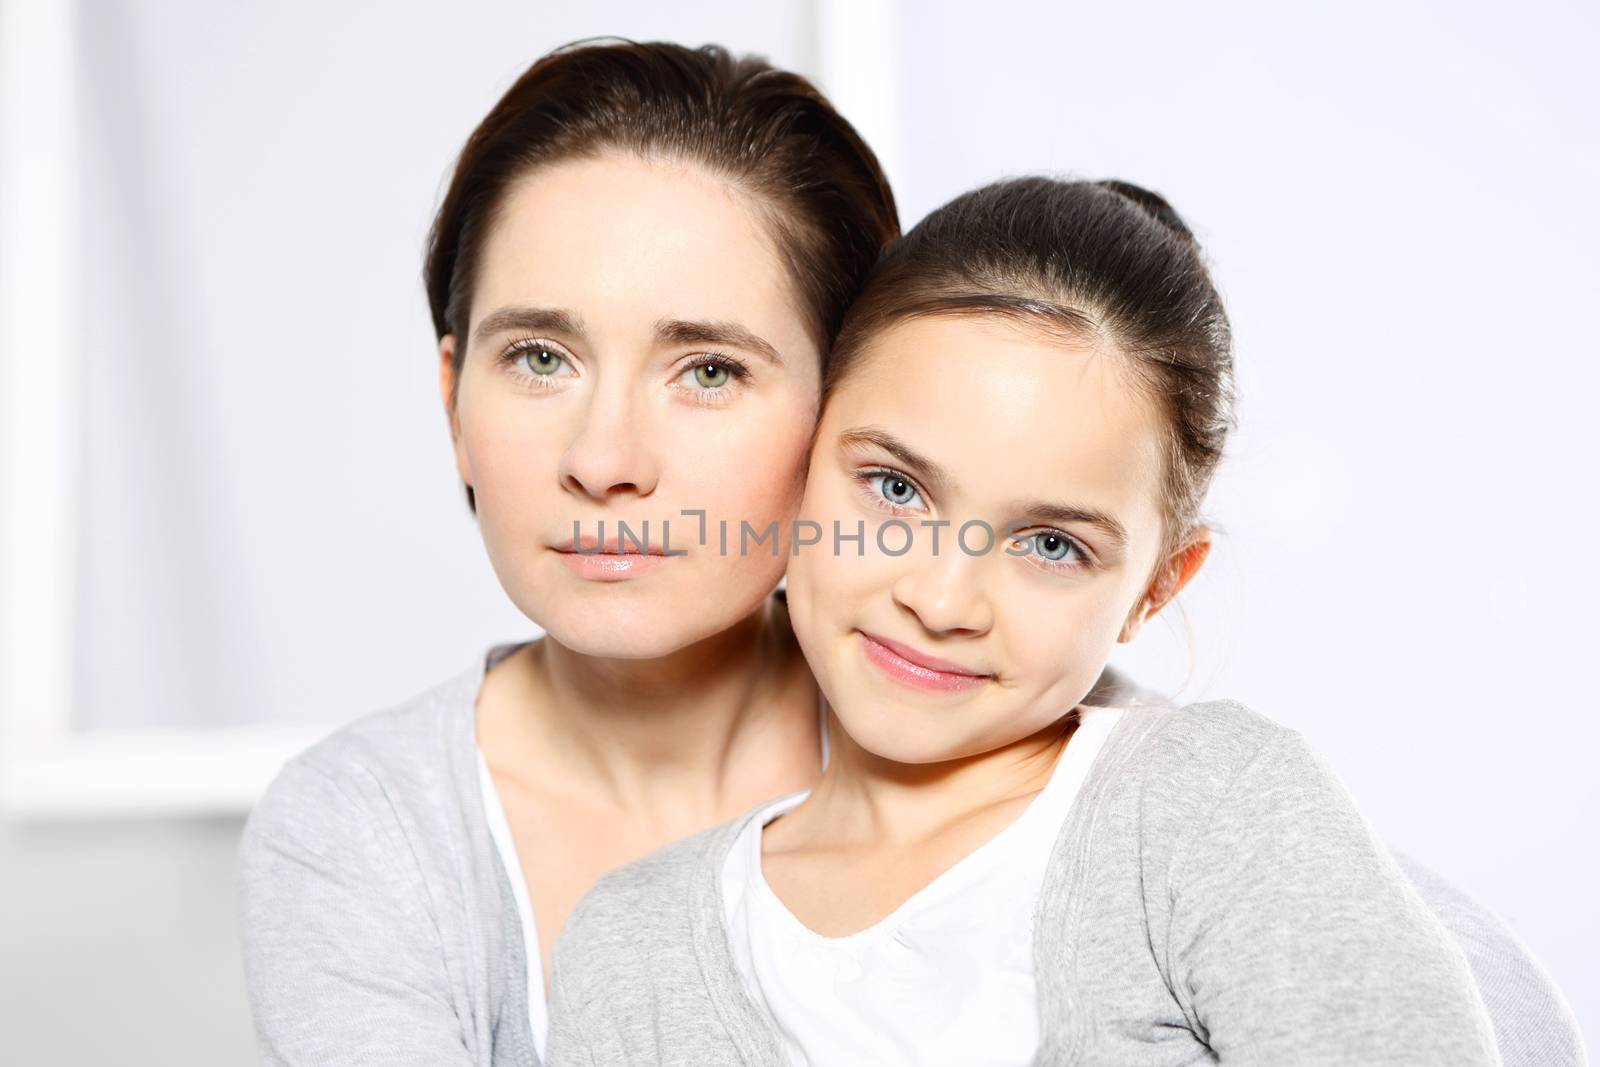 Mother and daughter by robert_przybysz